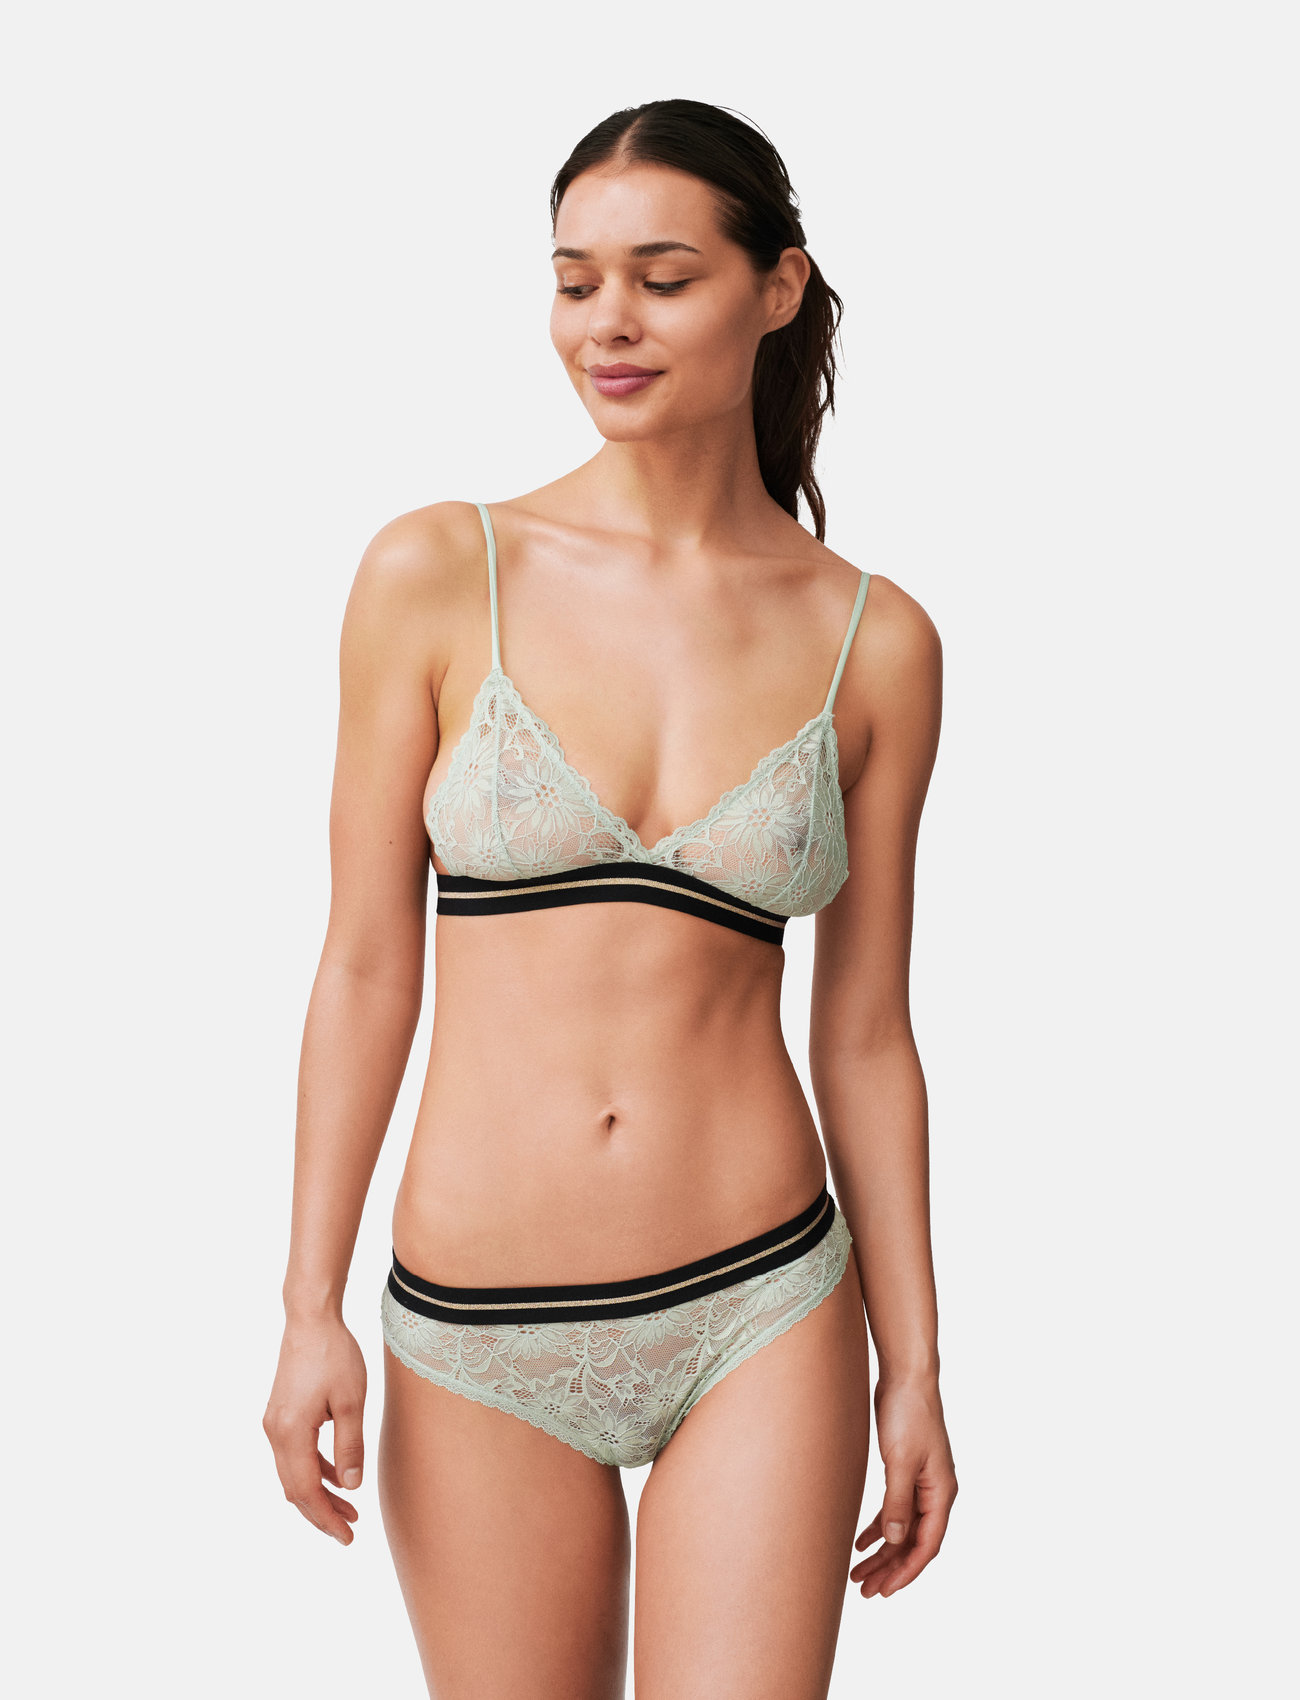 Savant Kritisere chap Danish Endurance Blooming Lace Thong By Pernille Blume 2 Pack - String |  Boozt.com